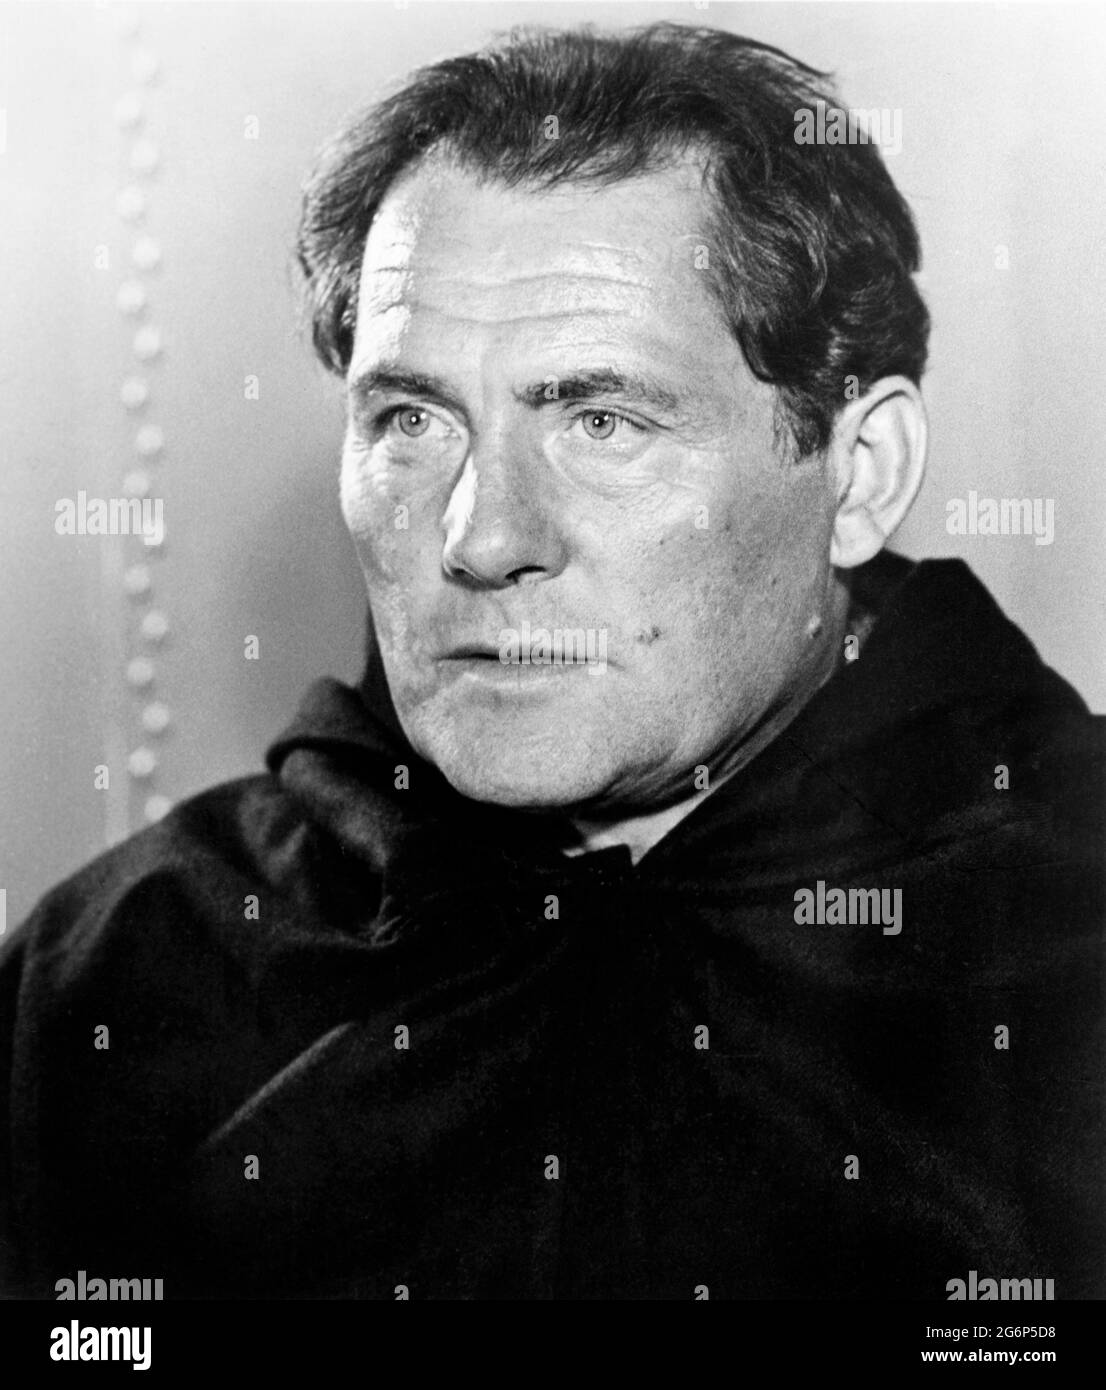 Robert Shaw, Head and Shoulders Portrait, on-set of the Film, 'Avalanche Express', 20th Century-Fox, 1979 Stock Photo